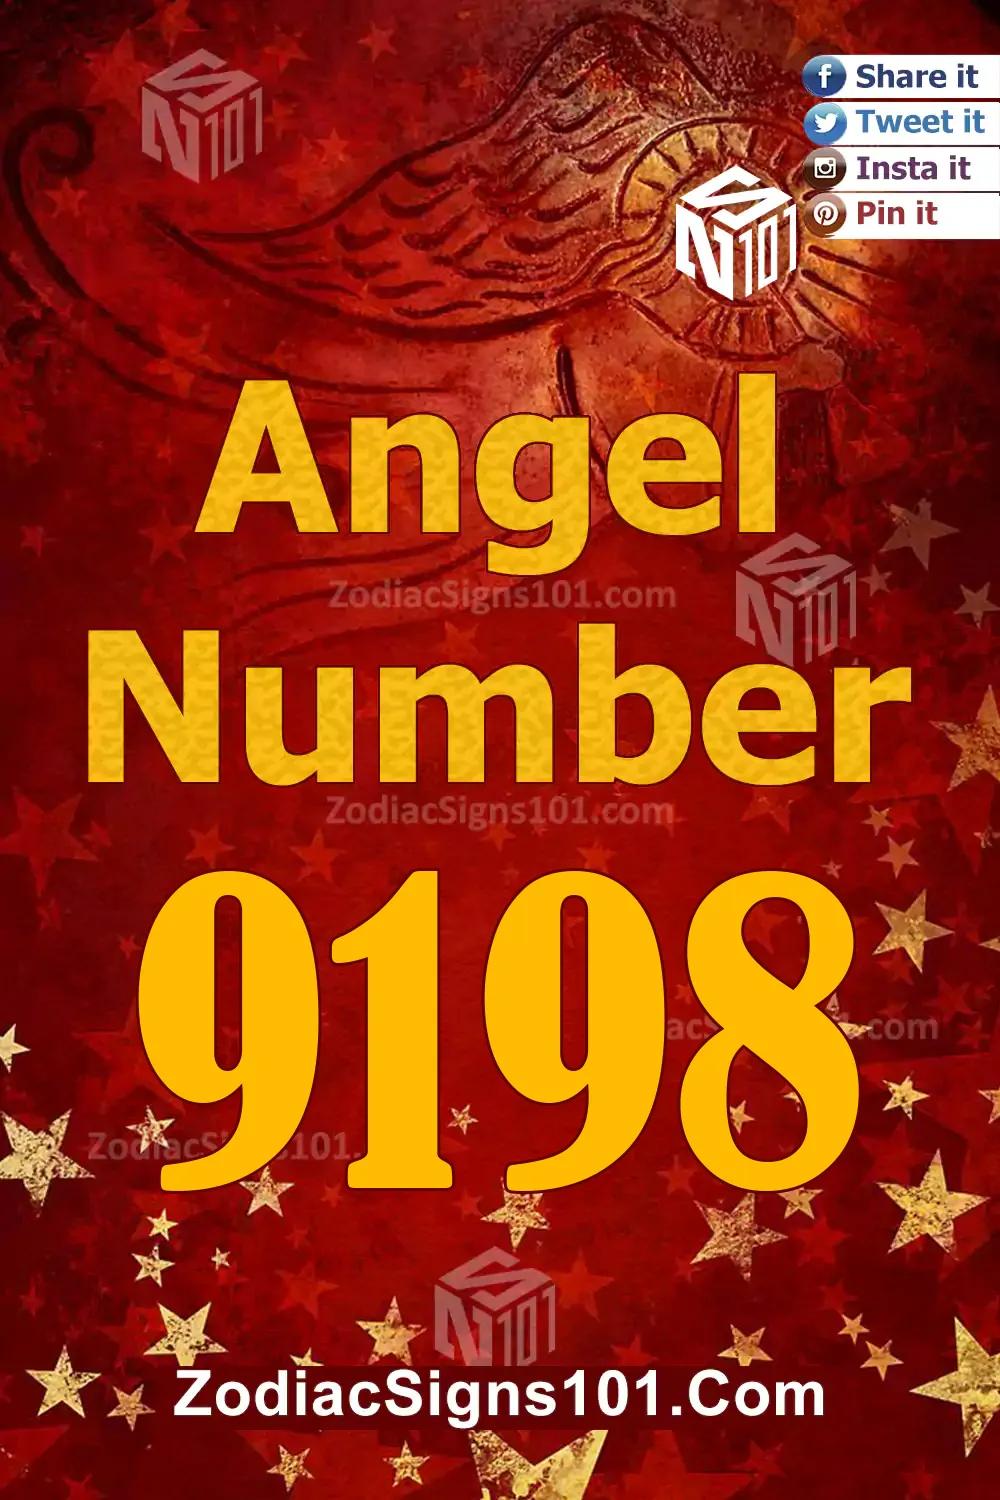 9198 Angel Number Meaning